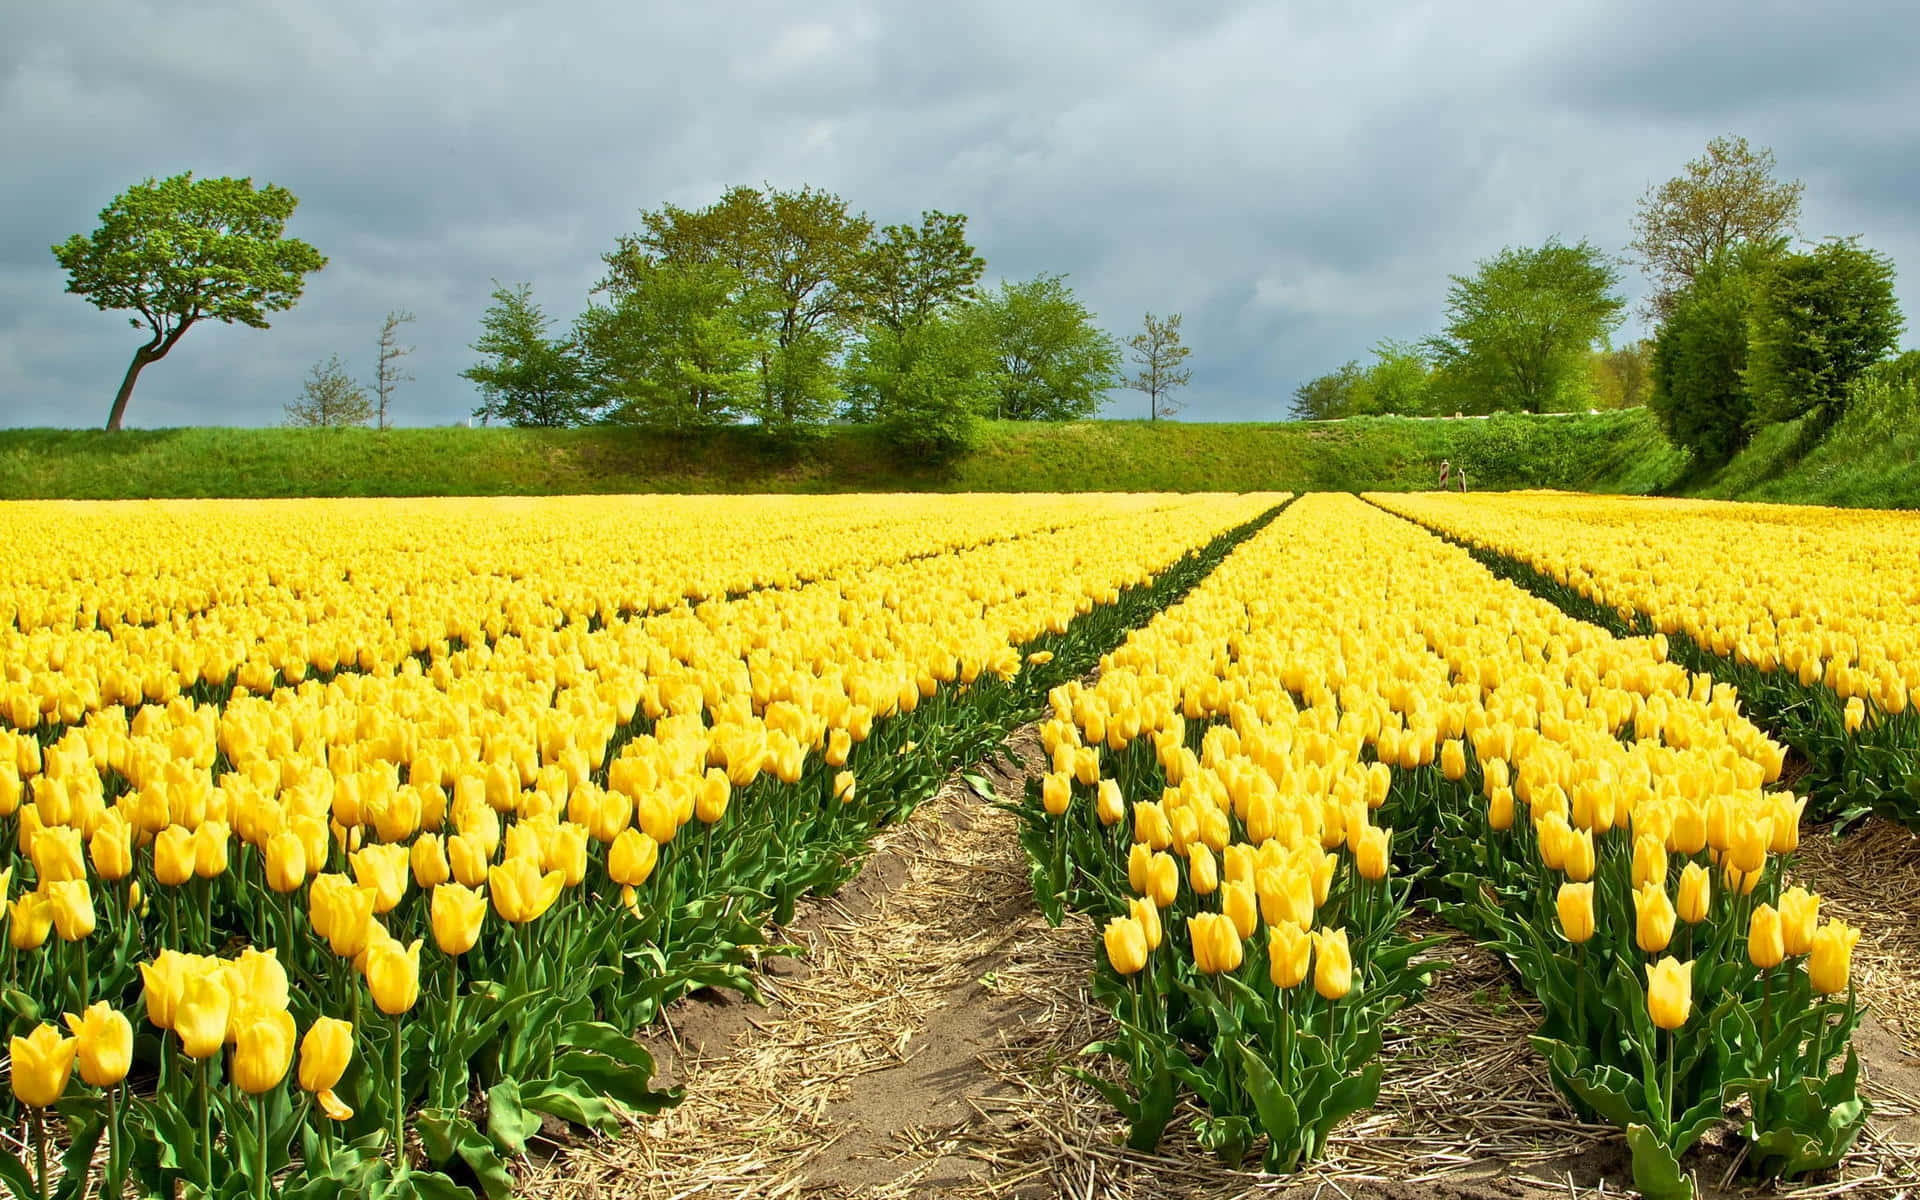 Capturing the vibrancy of the Tulip Field Wallpaper